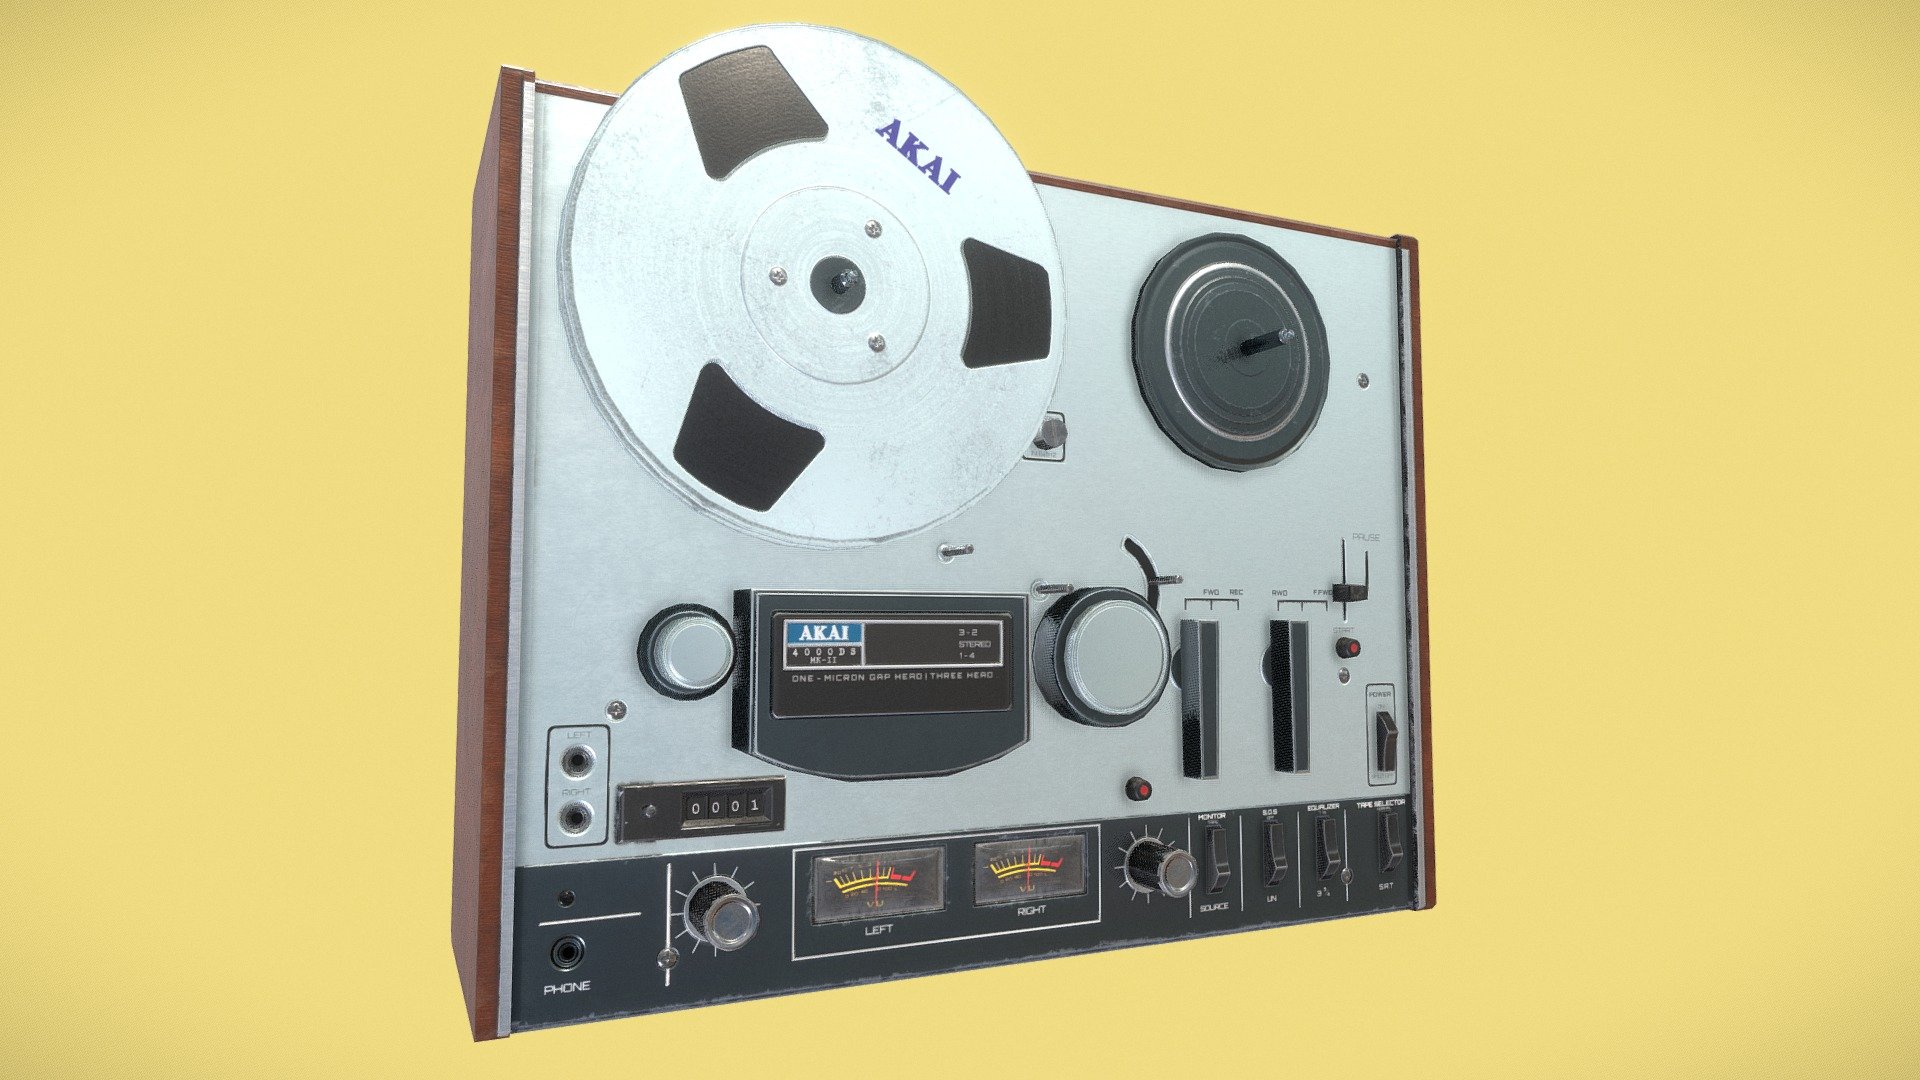 An old Akai DS4000 Reel to reel player i recreated for a school project!
I used Cinema 4D for the moddeling and unwrapping and textured it in Substance Painter! - Vintage Reel to Reel - 3D model by TimBuhrs 3d model